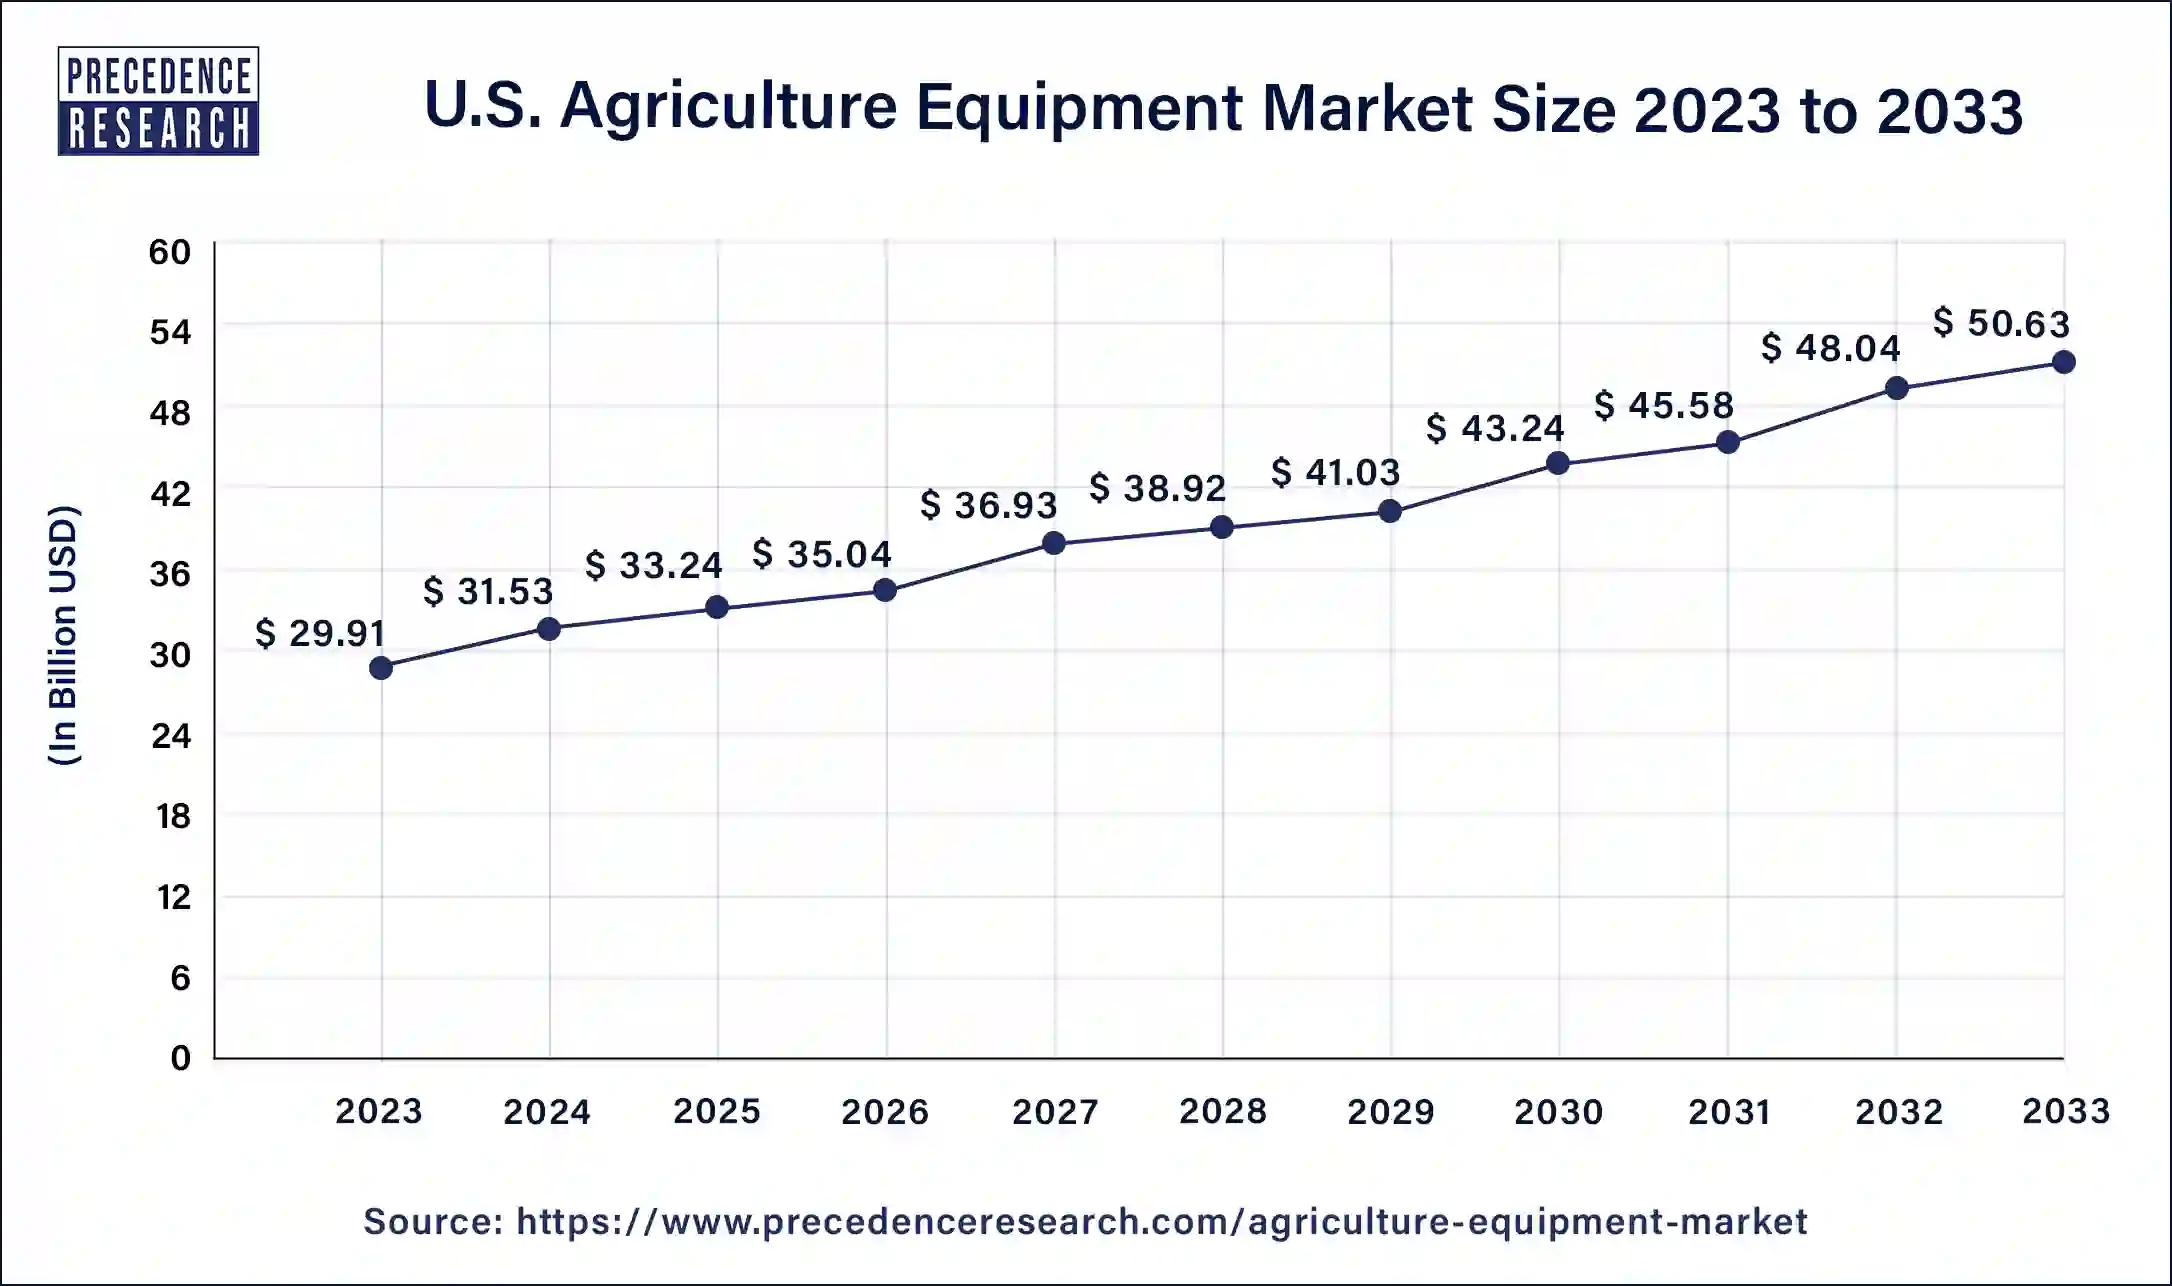 U.S. Agriculture Equipment Market Size 2024 to 2033